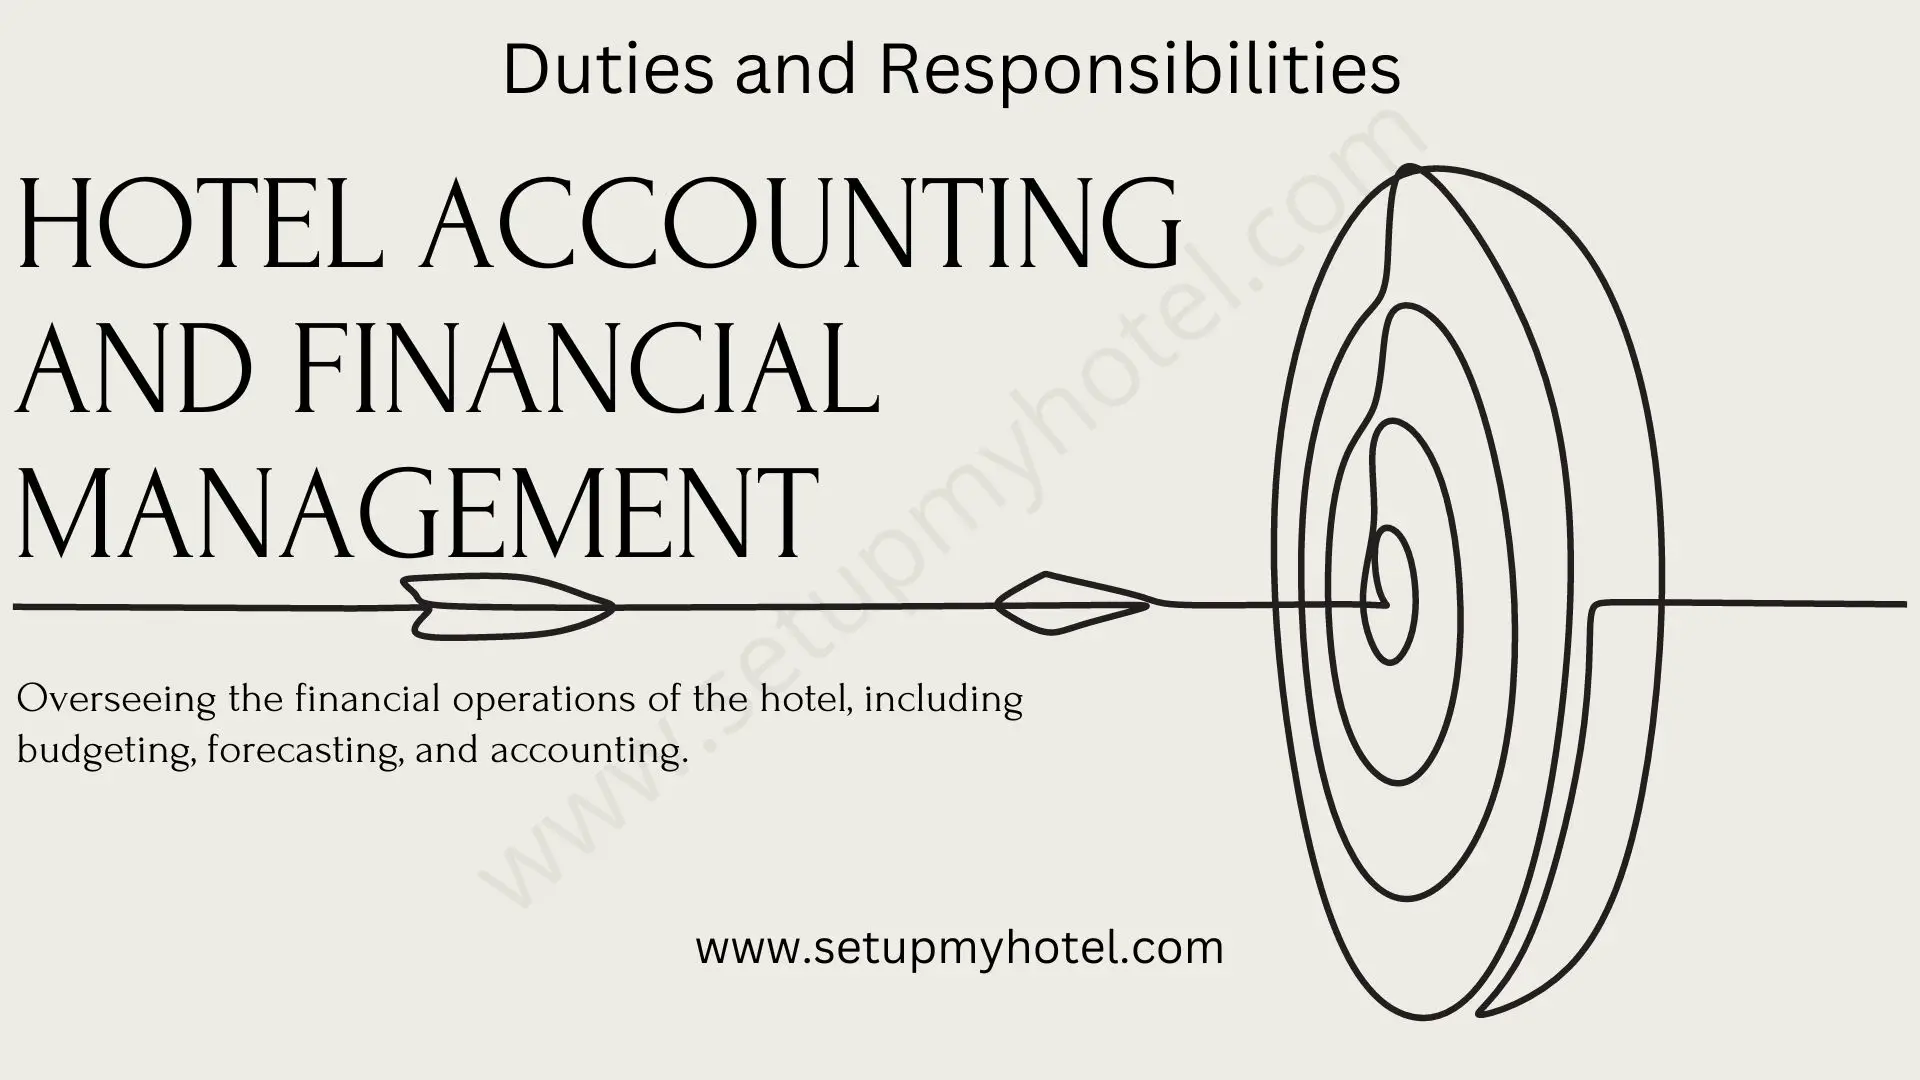 Working in hotel accounting and financial management can be a challenging and rewarding career. As a professional in this field, you will be responsible for managing all financial transactions, ensuring that the hotel's financial records are accurate and up-to-date, and providing financial analysis and reporting to management. Some of the key responsibilities of a hotel accountant include managing accounts payable and receivable, preparing financial statements and reports, budgeting and forecasting, cash management, and financial analysis. You will also be responsible for ensuring compliance with all relevant financial regulations and laws. In order to be successful in this role, you will need to have a strong understanding of accounting principles and financial management, as well as excellent analytical and problem-solving skills. You will also need to be detail-oriented and highly organized, with the ability to manage multiple tasks and deadlines. Overall, a career in hotel accounting and financial management can be a great choice for those who are interested in the hospitality industry and have a passion for numbers and financial analysis. With the right skills and experience, you can achieve great success in this field and make a valuable contribution to the success of your hotel or resort.